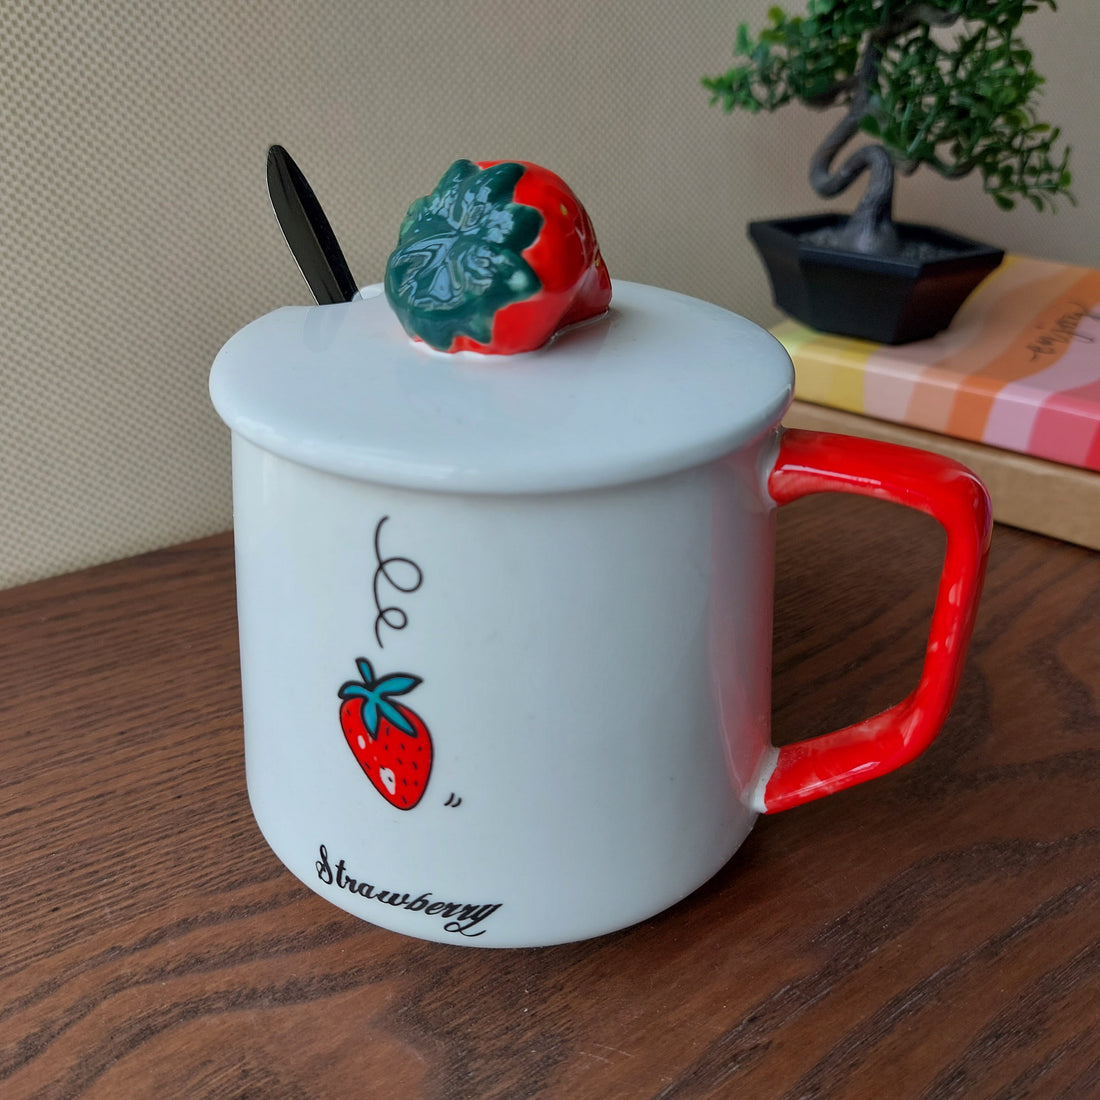 Strawberry Ceramic Mugs With Lid and Spoon